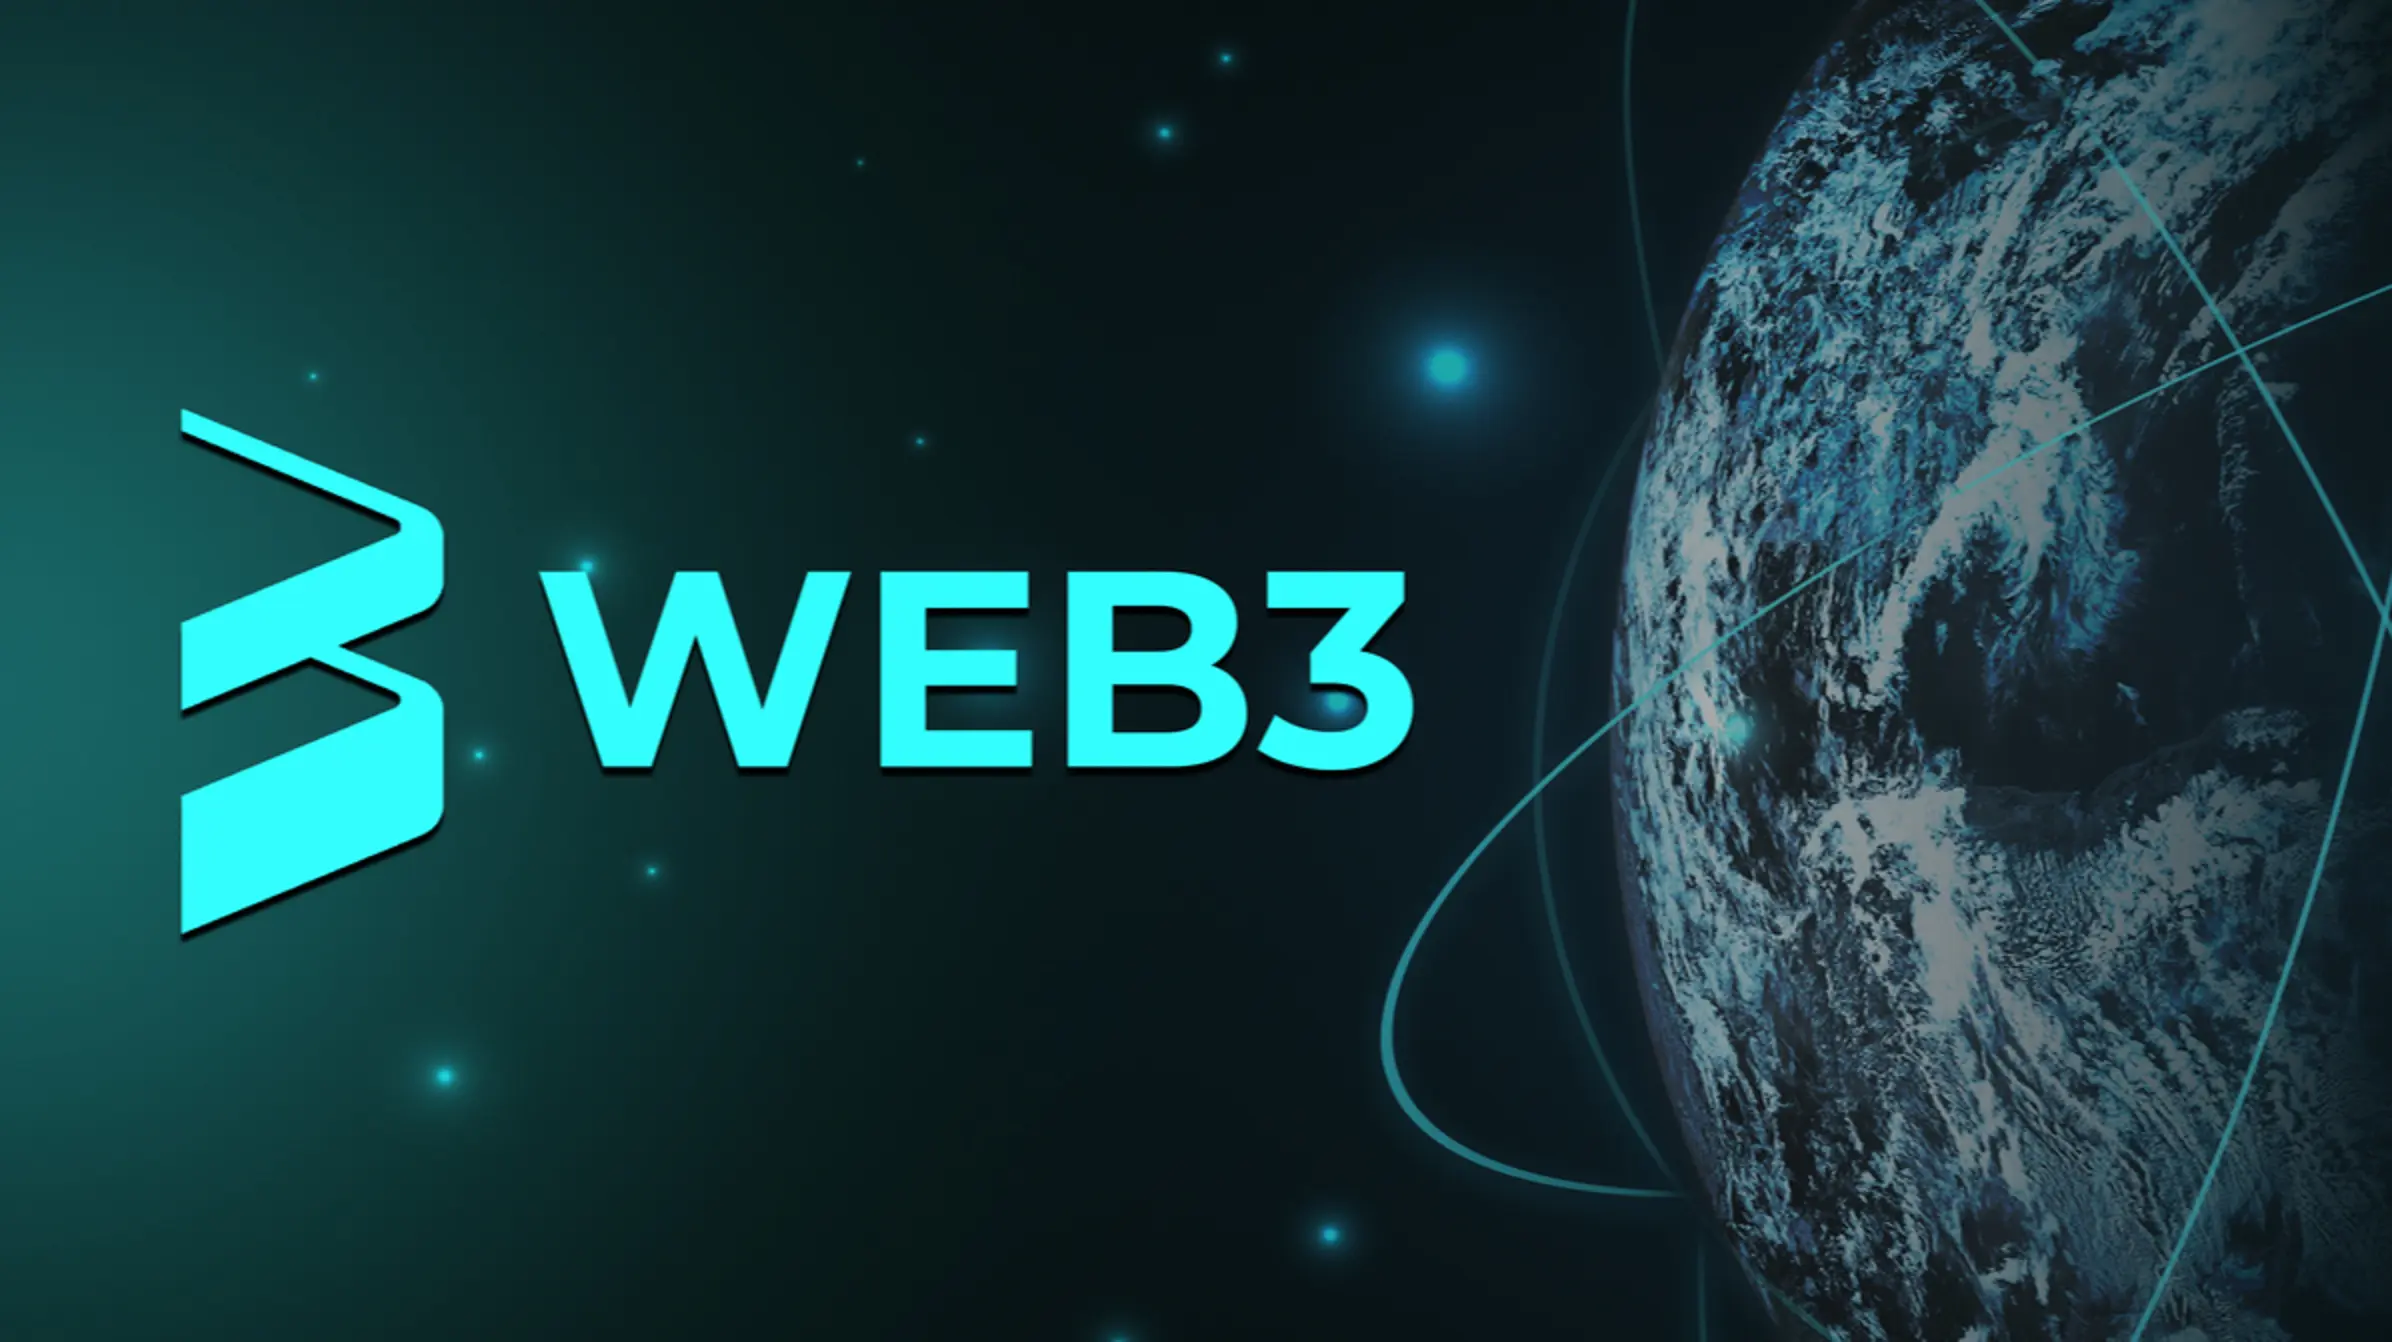 Web 2.0 VS Web 3.0 - Major Differences You Need To Know